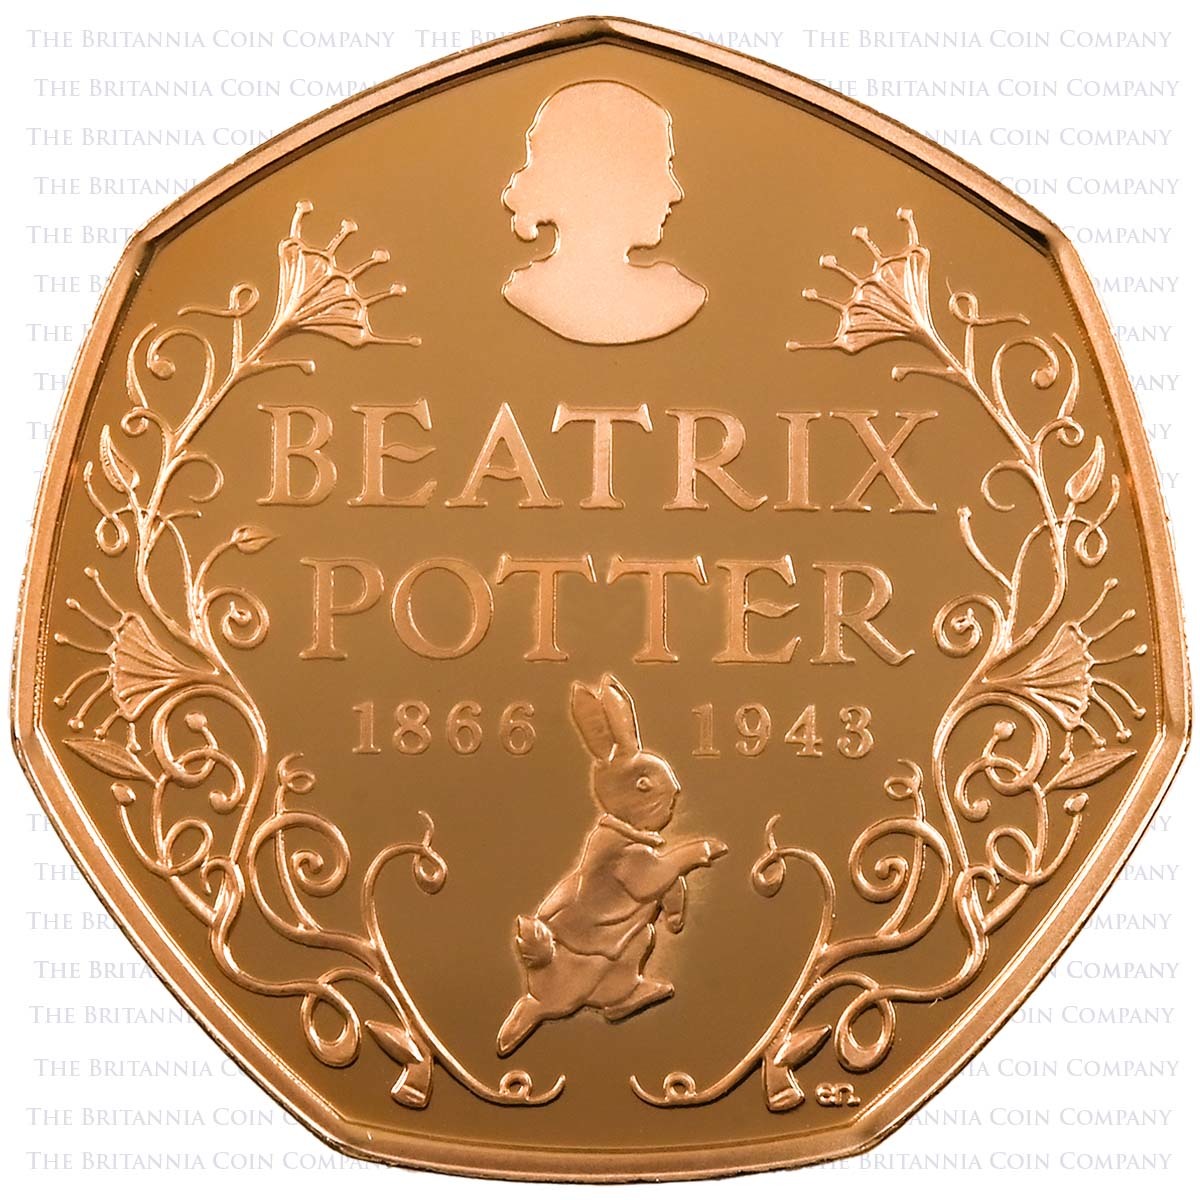 UK16BPGP 2016 Beatrix Potter 150th Anniversary Fifty Pence Gold Proof Coin Reverse